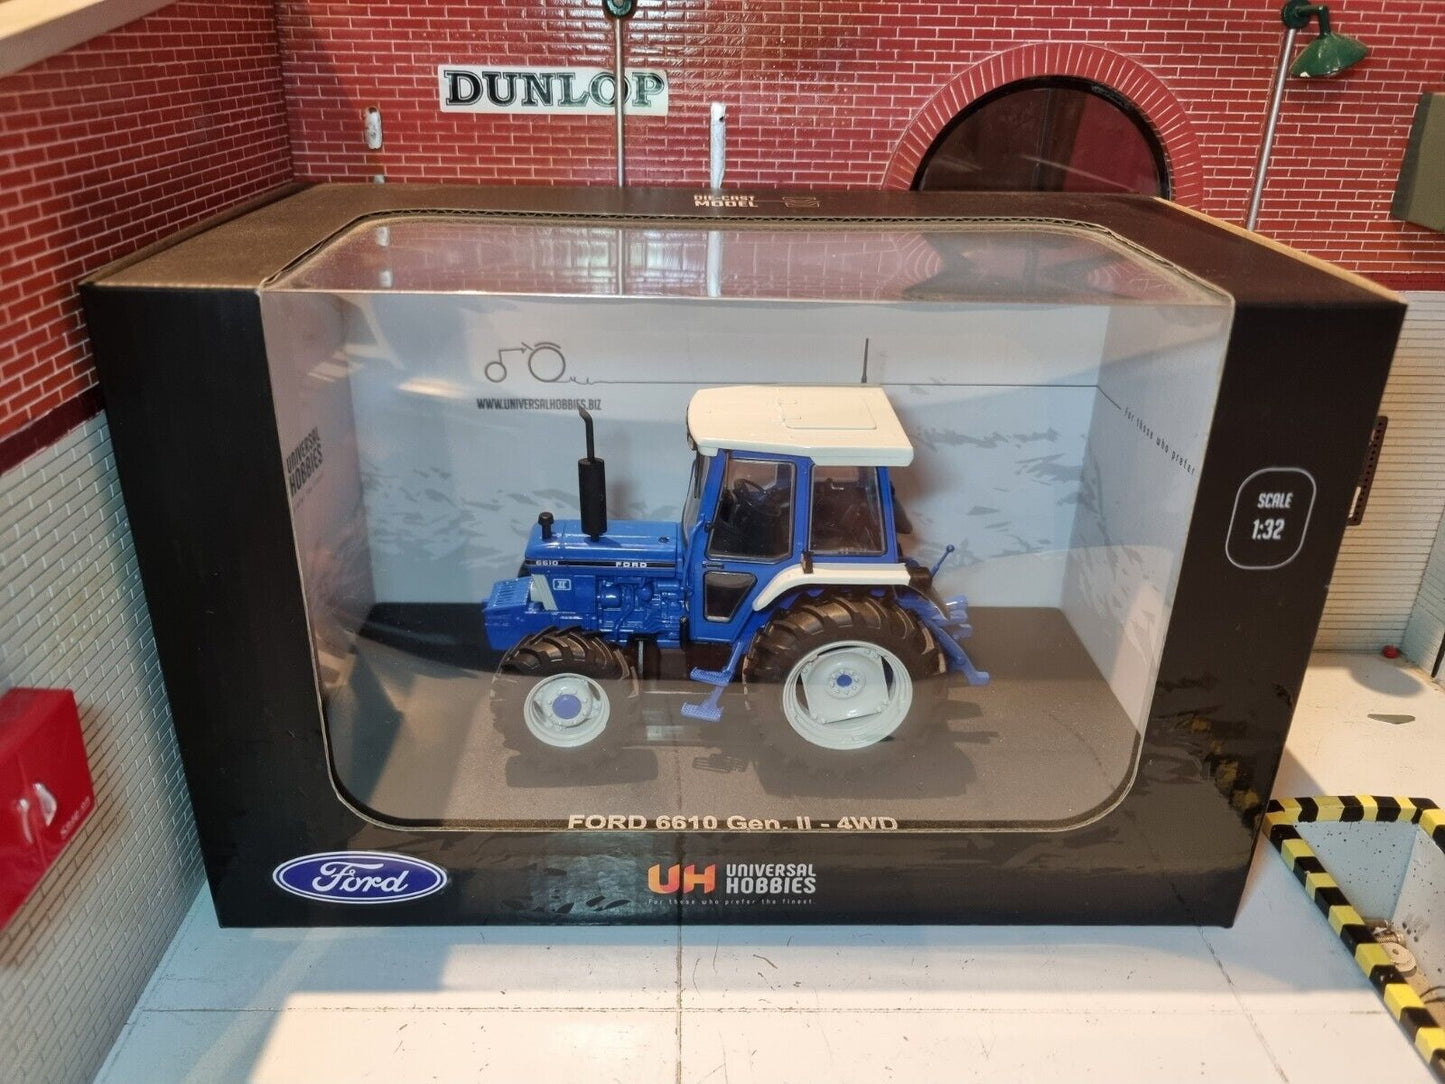 Ford 6610 Gen 2 Tractor 4WD 1985 UH4138 Universal Hobbies 1:32